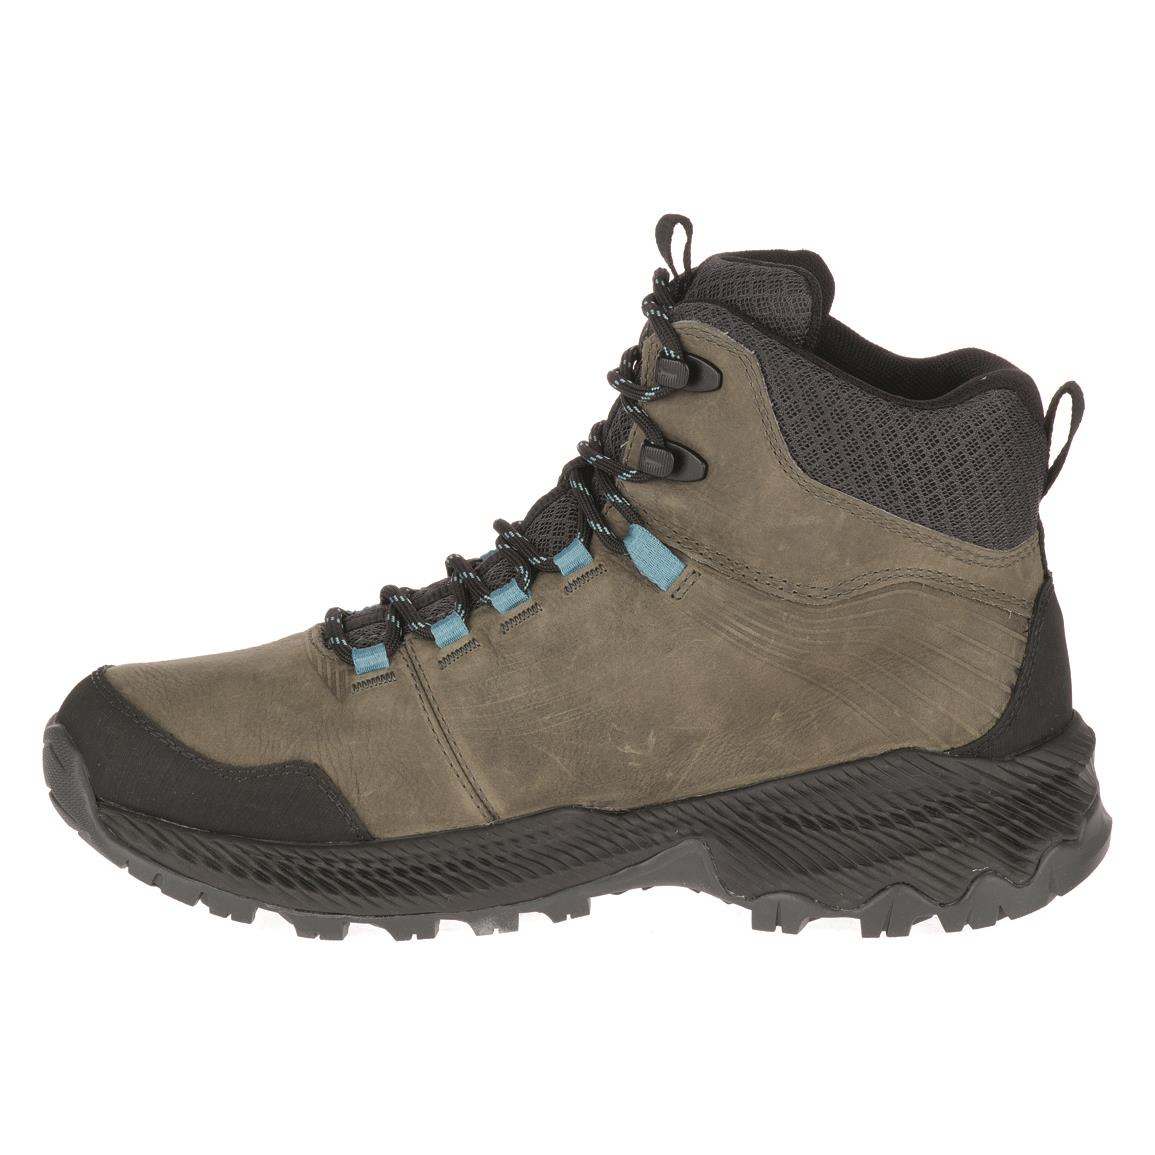 merrell forestbound mid womens